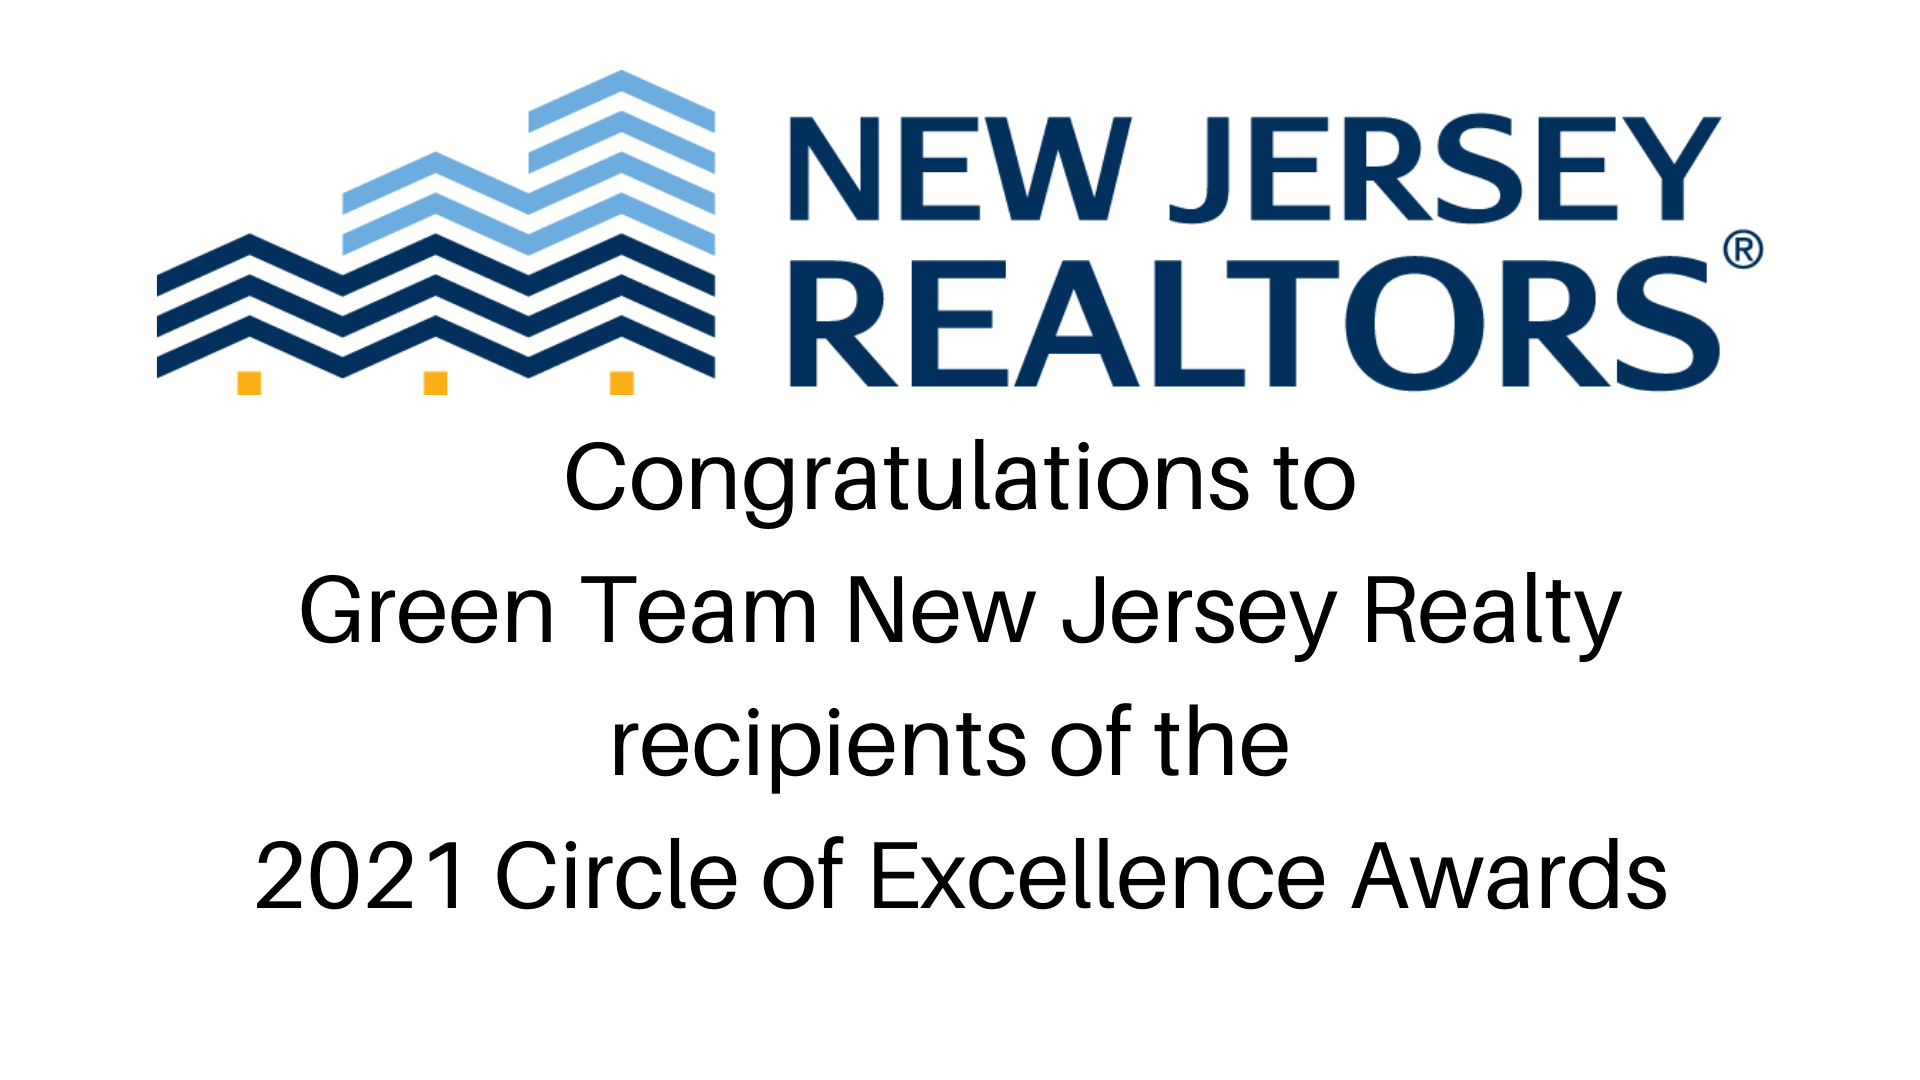 Green Team New Jersey recipiences of 2021 Circle of Excellence